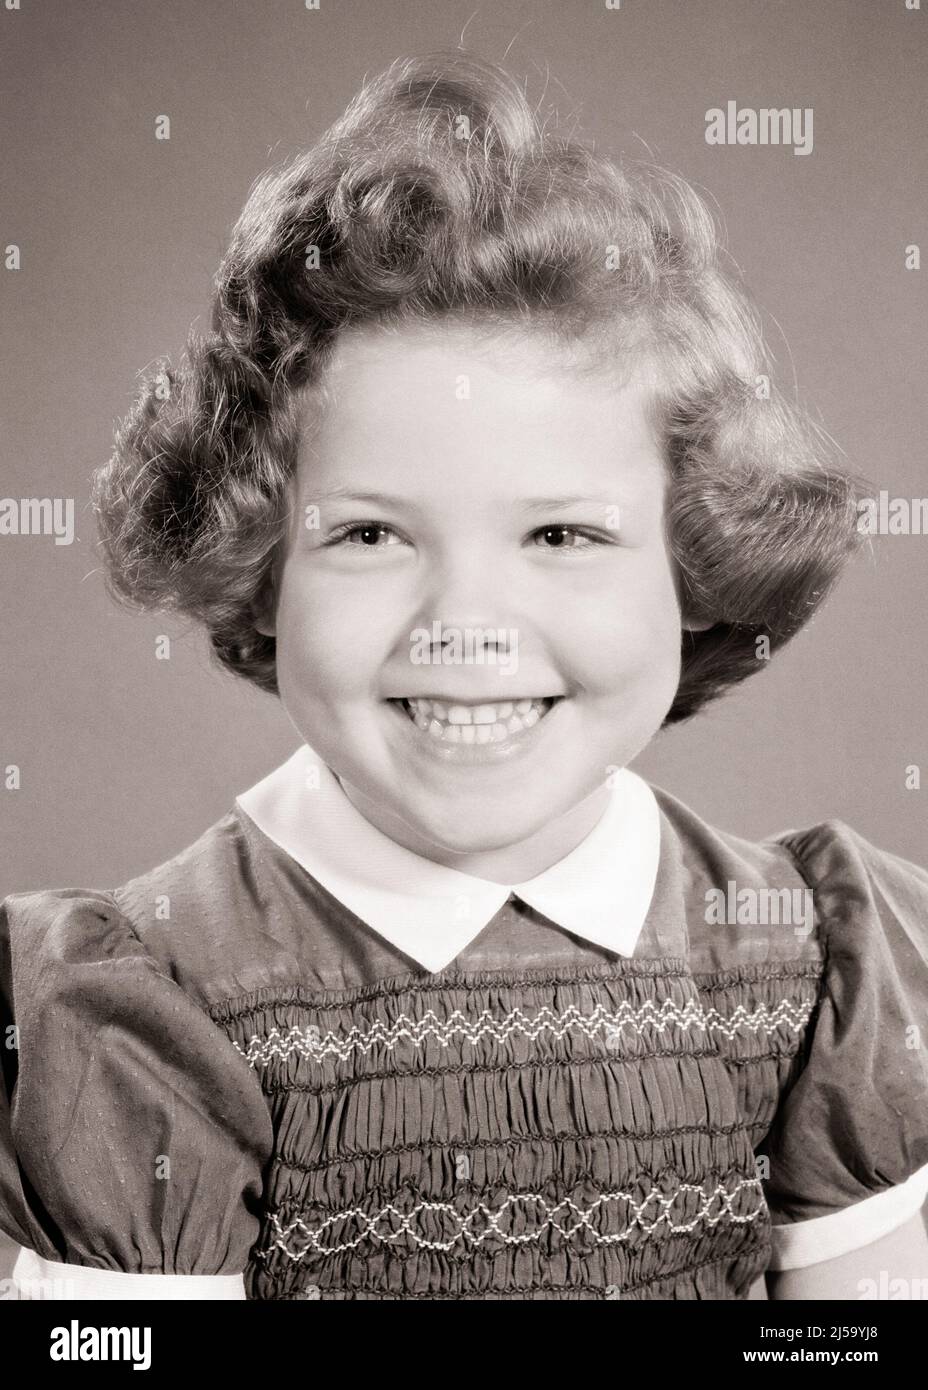 1950s PORTRAIT OF SMILING GIRL LOOKING OFF CAMERA WEARING DRESS WITH EMBROIDERY SMOCKING AND WHITE COLLAR - j3727 HAR001 HARS COPY SPACE CONFIDENCE EXPRESSIONS B&W EMBROIDERY HAPPINESS HEAD AND SHOULDERS CHEERFUL AND EXCITEMENT PRIDE SMILES JOYFUL STYLISH PLEASANT AGREEABLE CHARMING CURL JUVENILES LOVABLE PLEASING ADORABLE APPEALING BLACK AND WHITE CAUCASIAN ETHNICITY CURLY HAIR HAR001 OLD FASHIONED SMOCKING Stock Photo